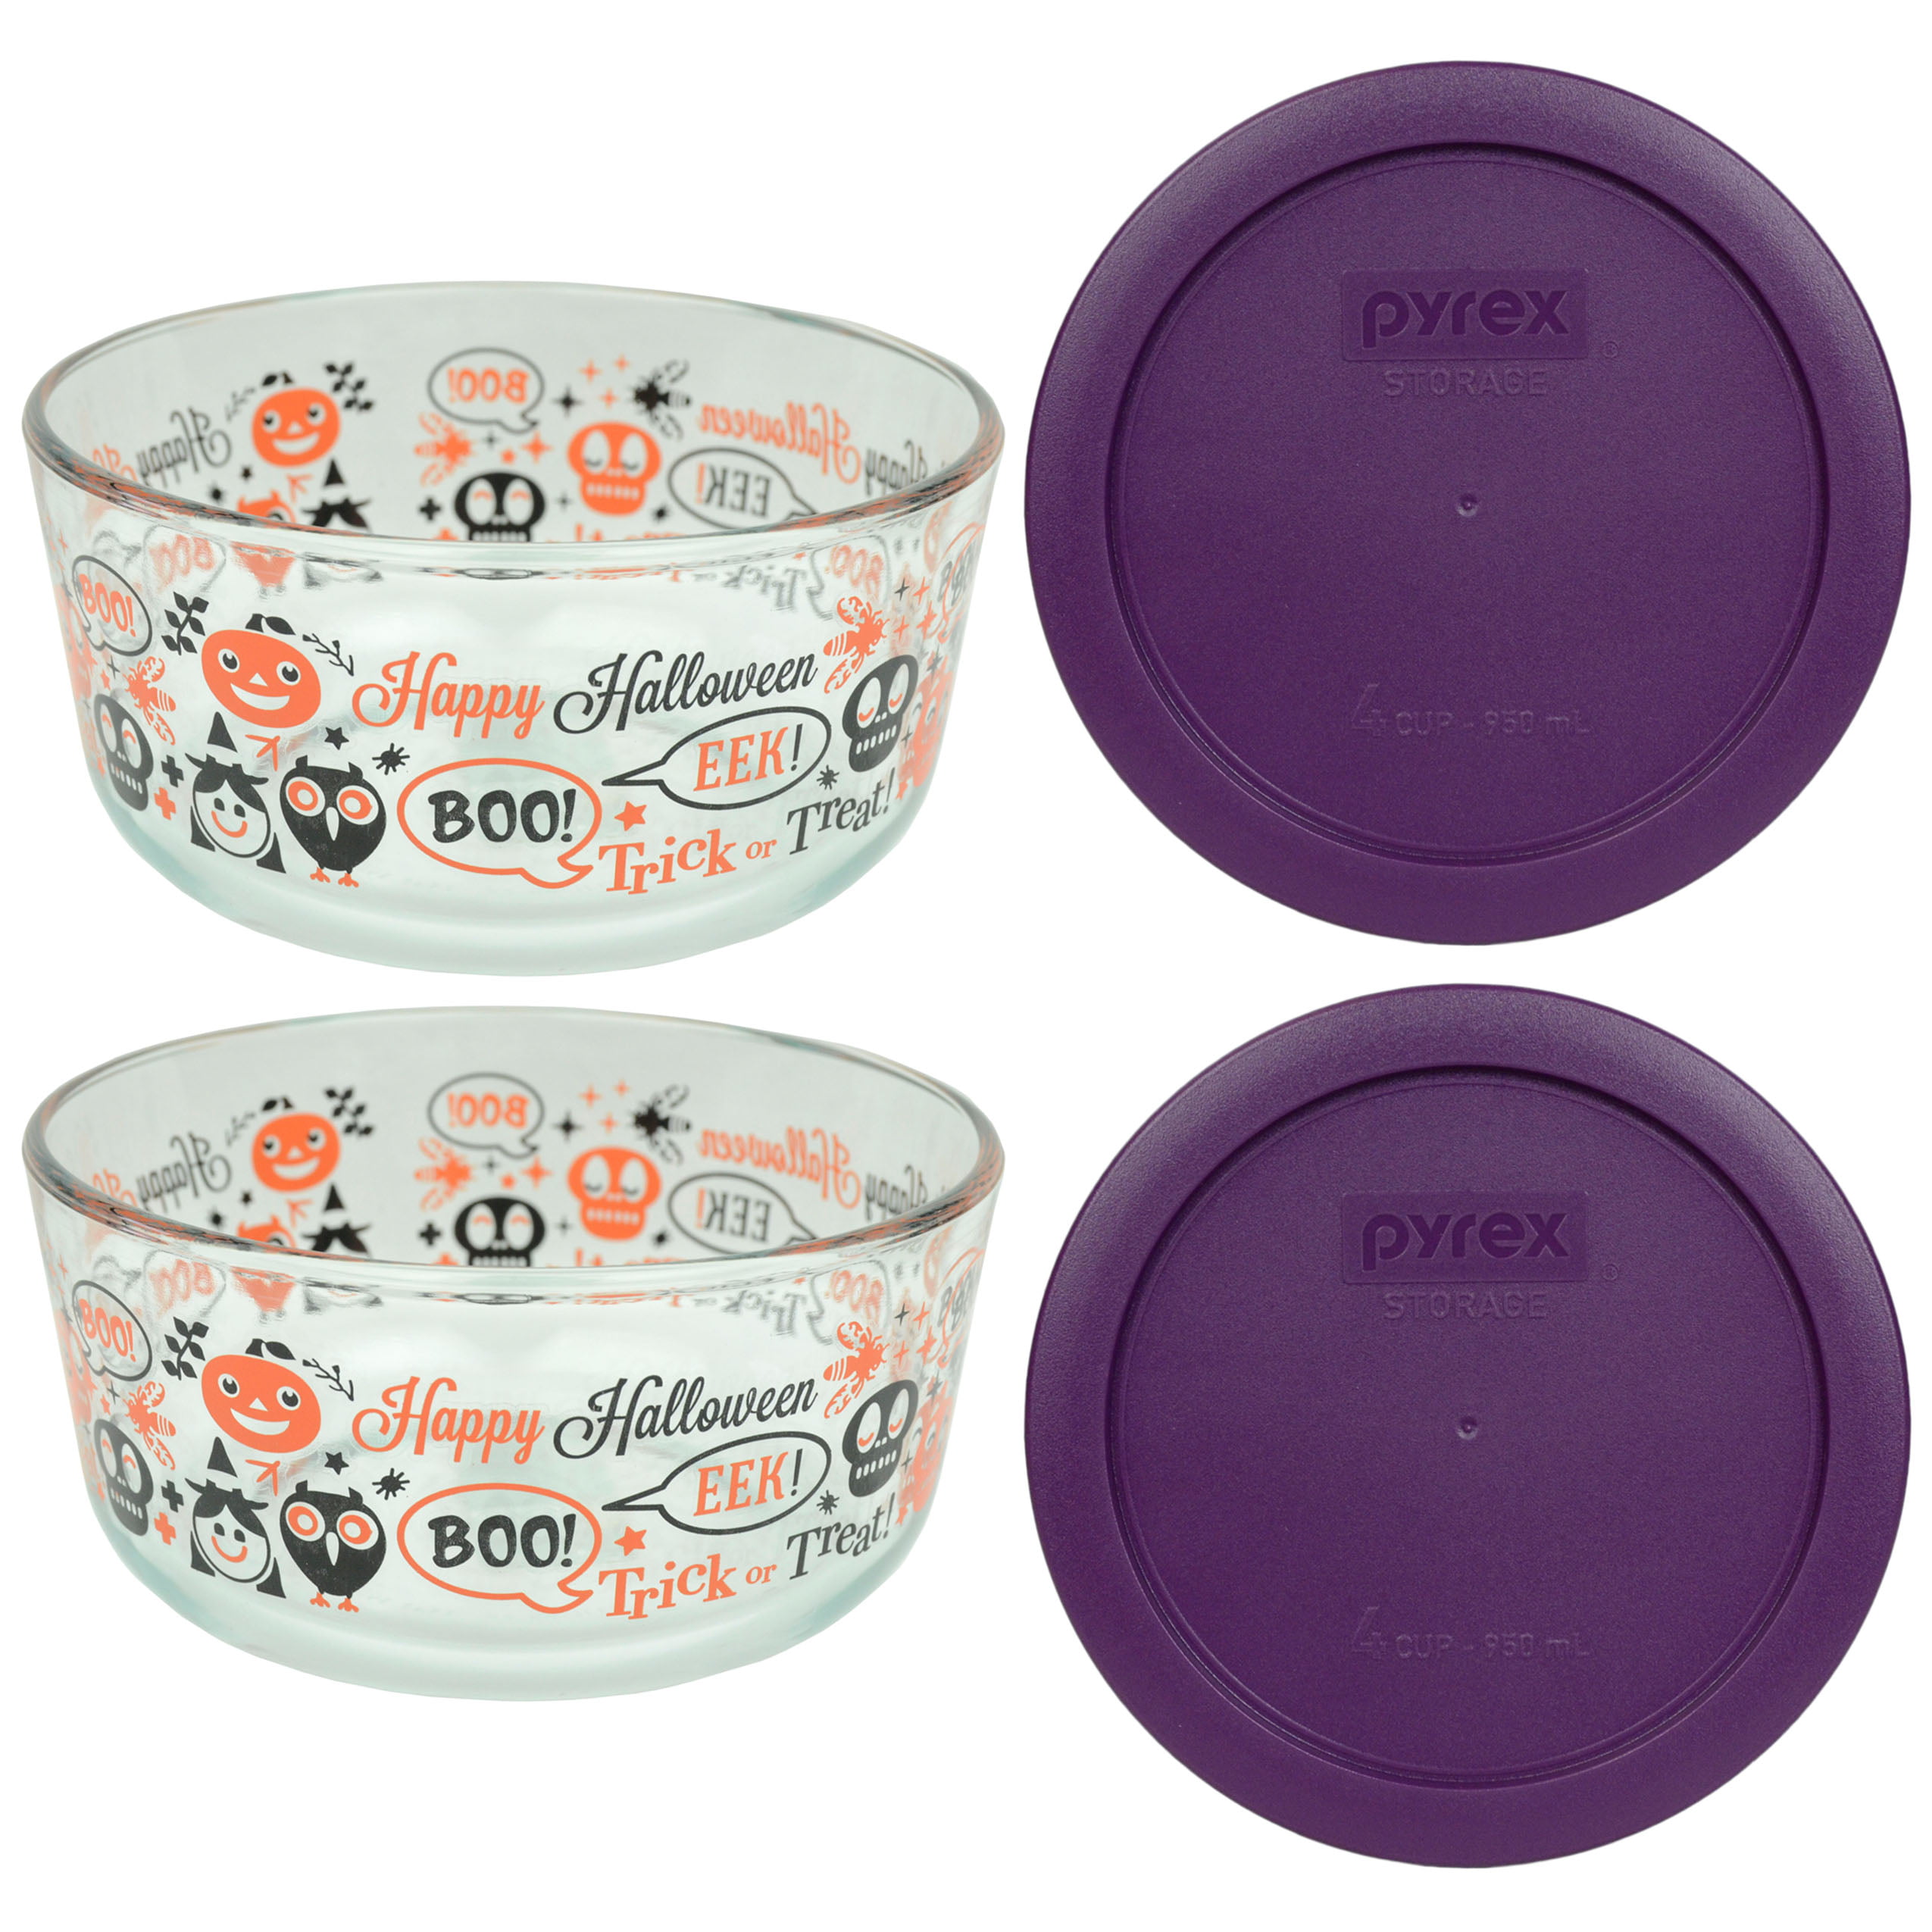 Pyrex 7201 4-Cup Spooky Fun Glass Bowl and 7201-PC Purple Plastic Lid Cover  (2-Pack) - Walmart.com